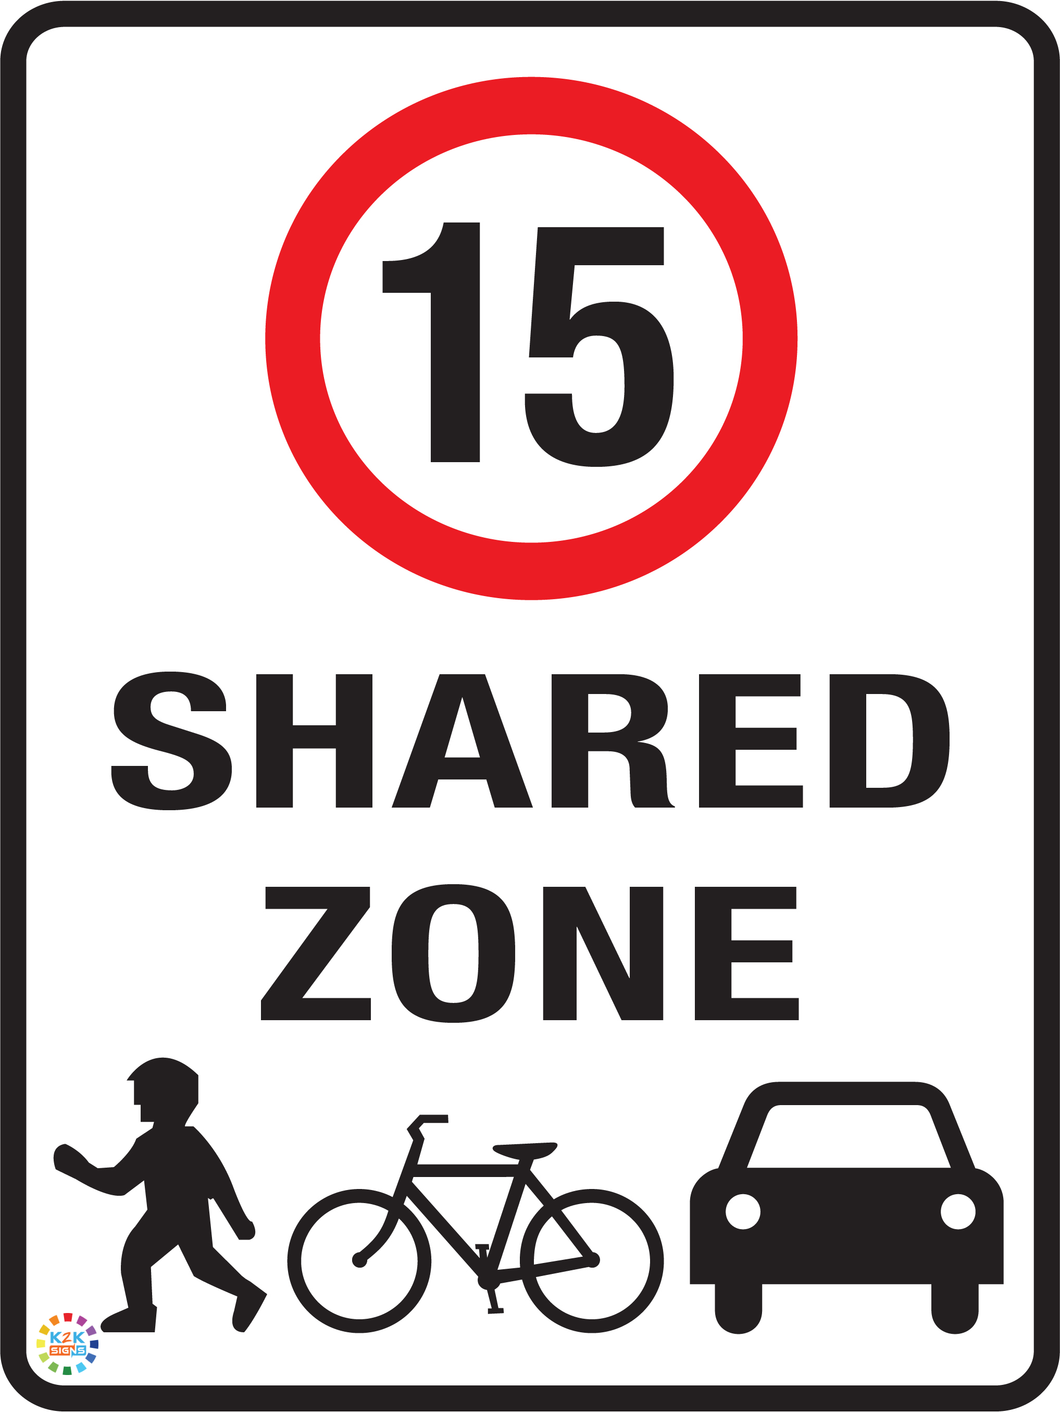 Shared Zone Speed Limit 15 Kph Sign